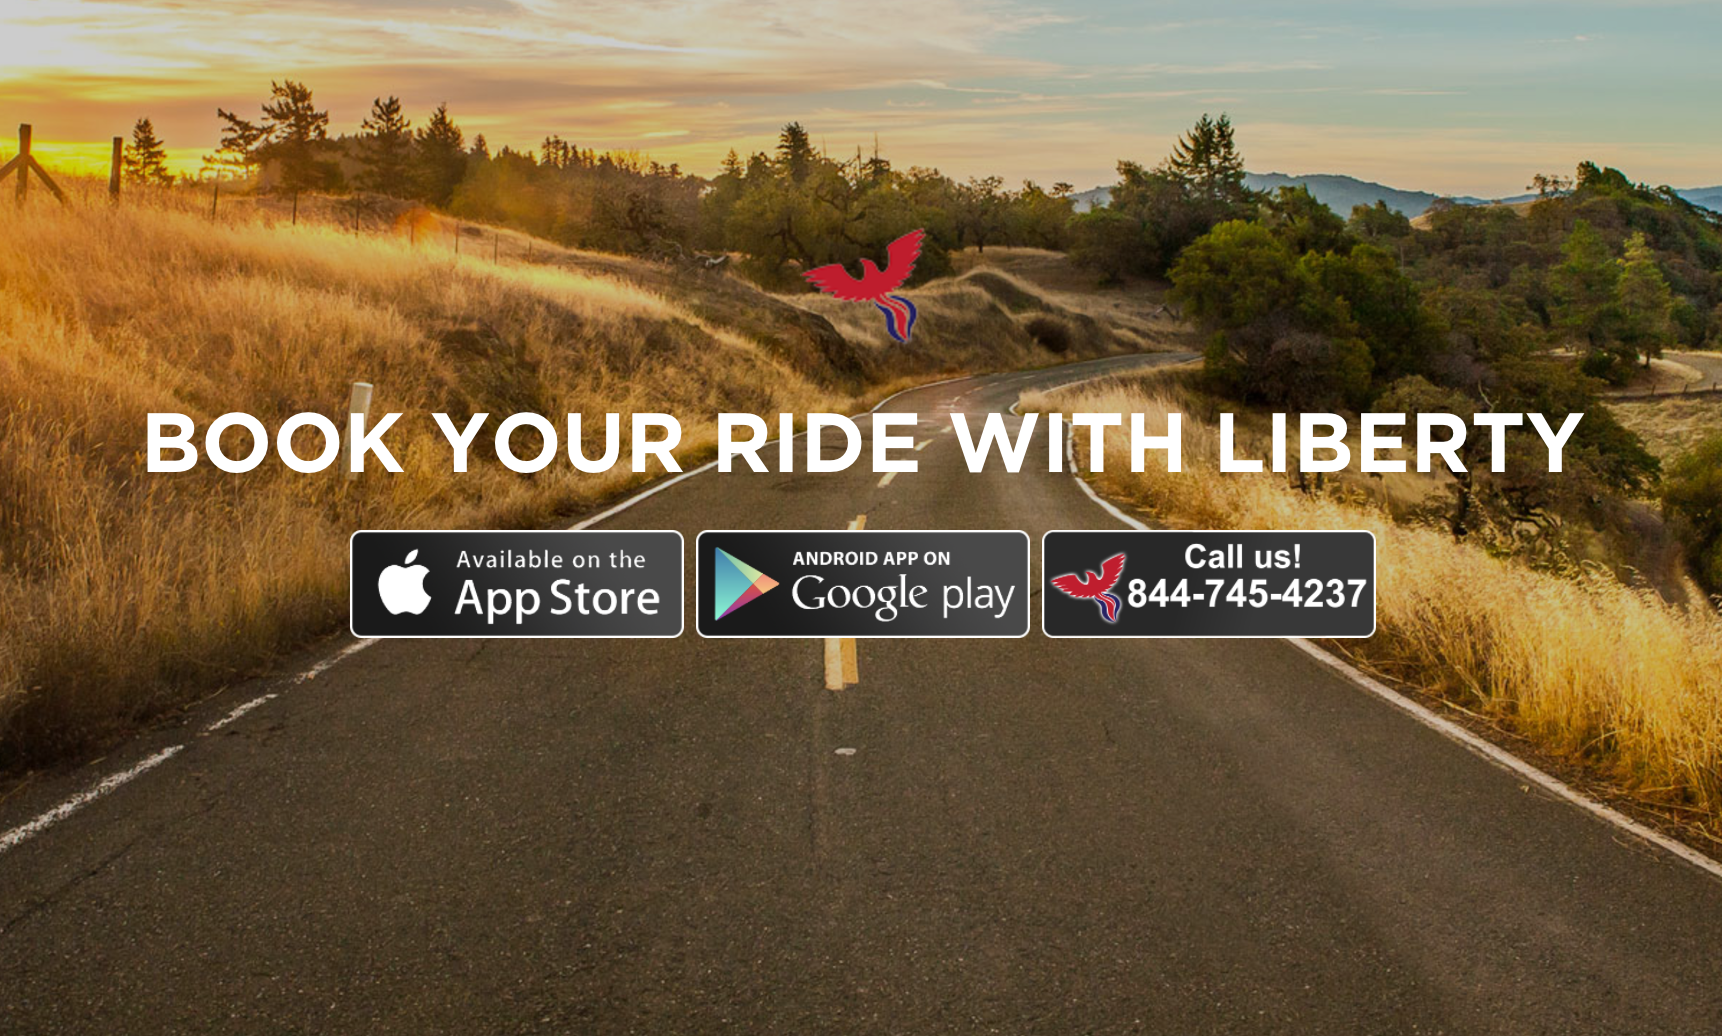 Book Your Ride With Liberty Image